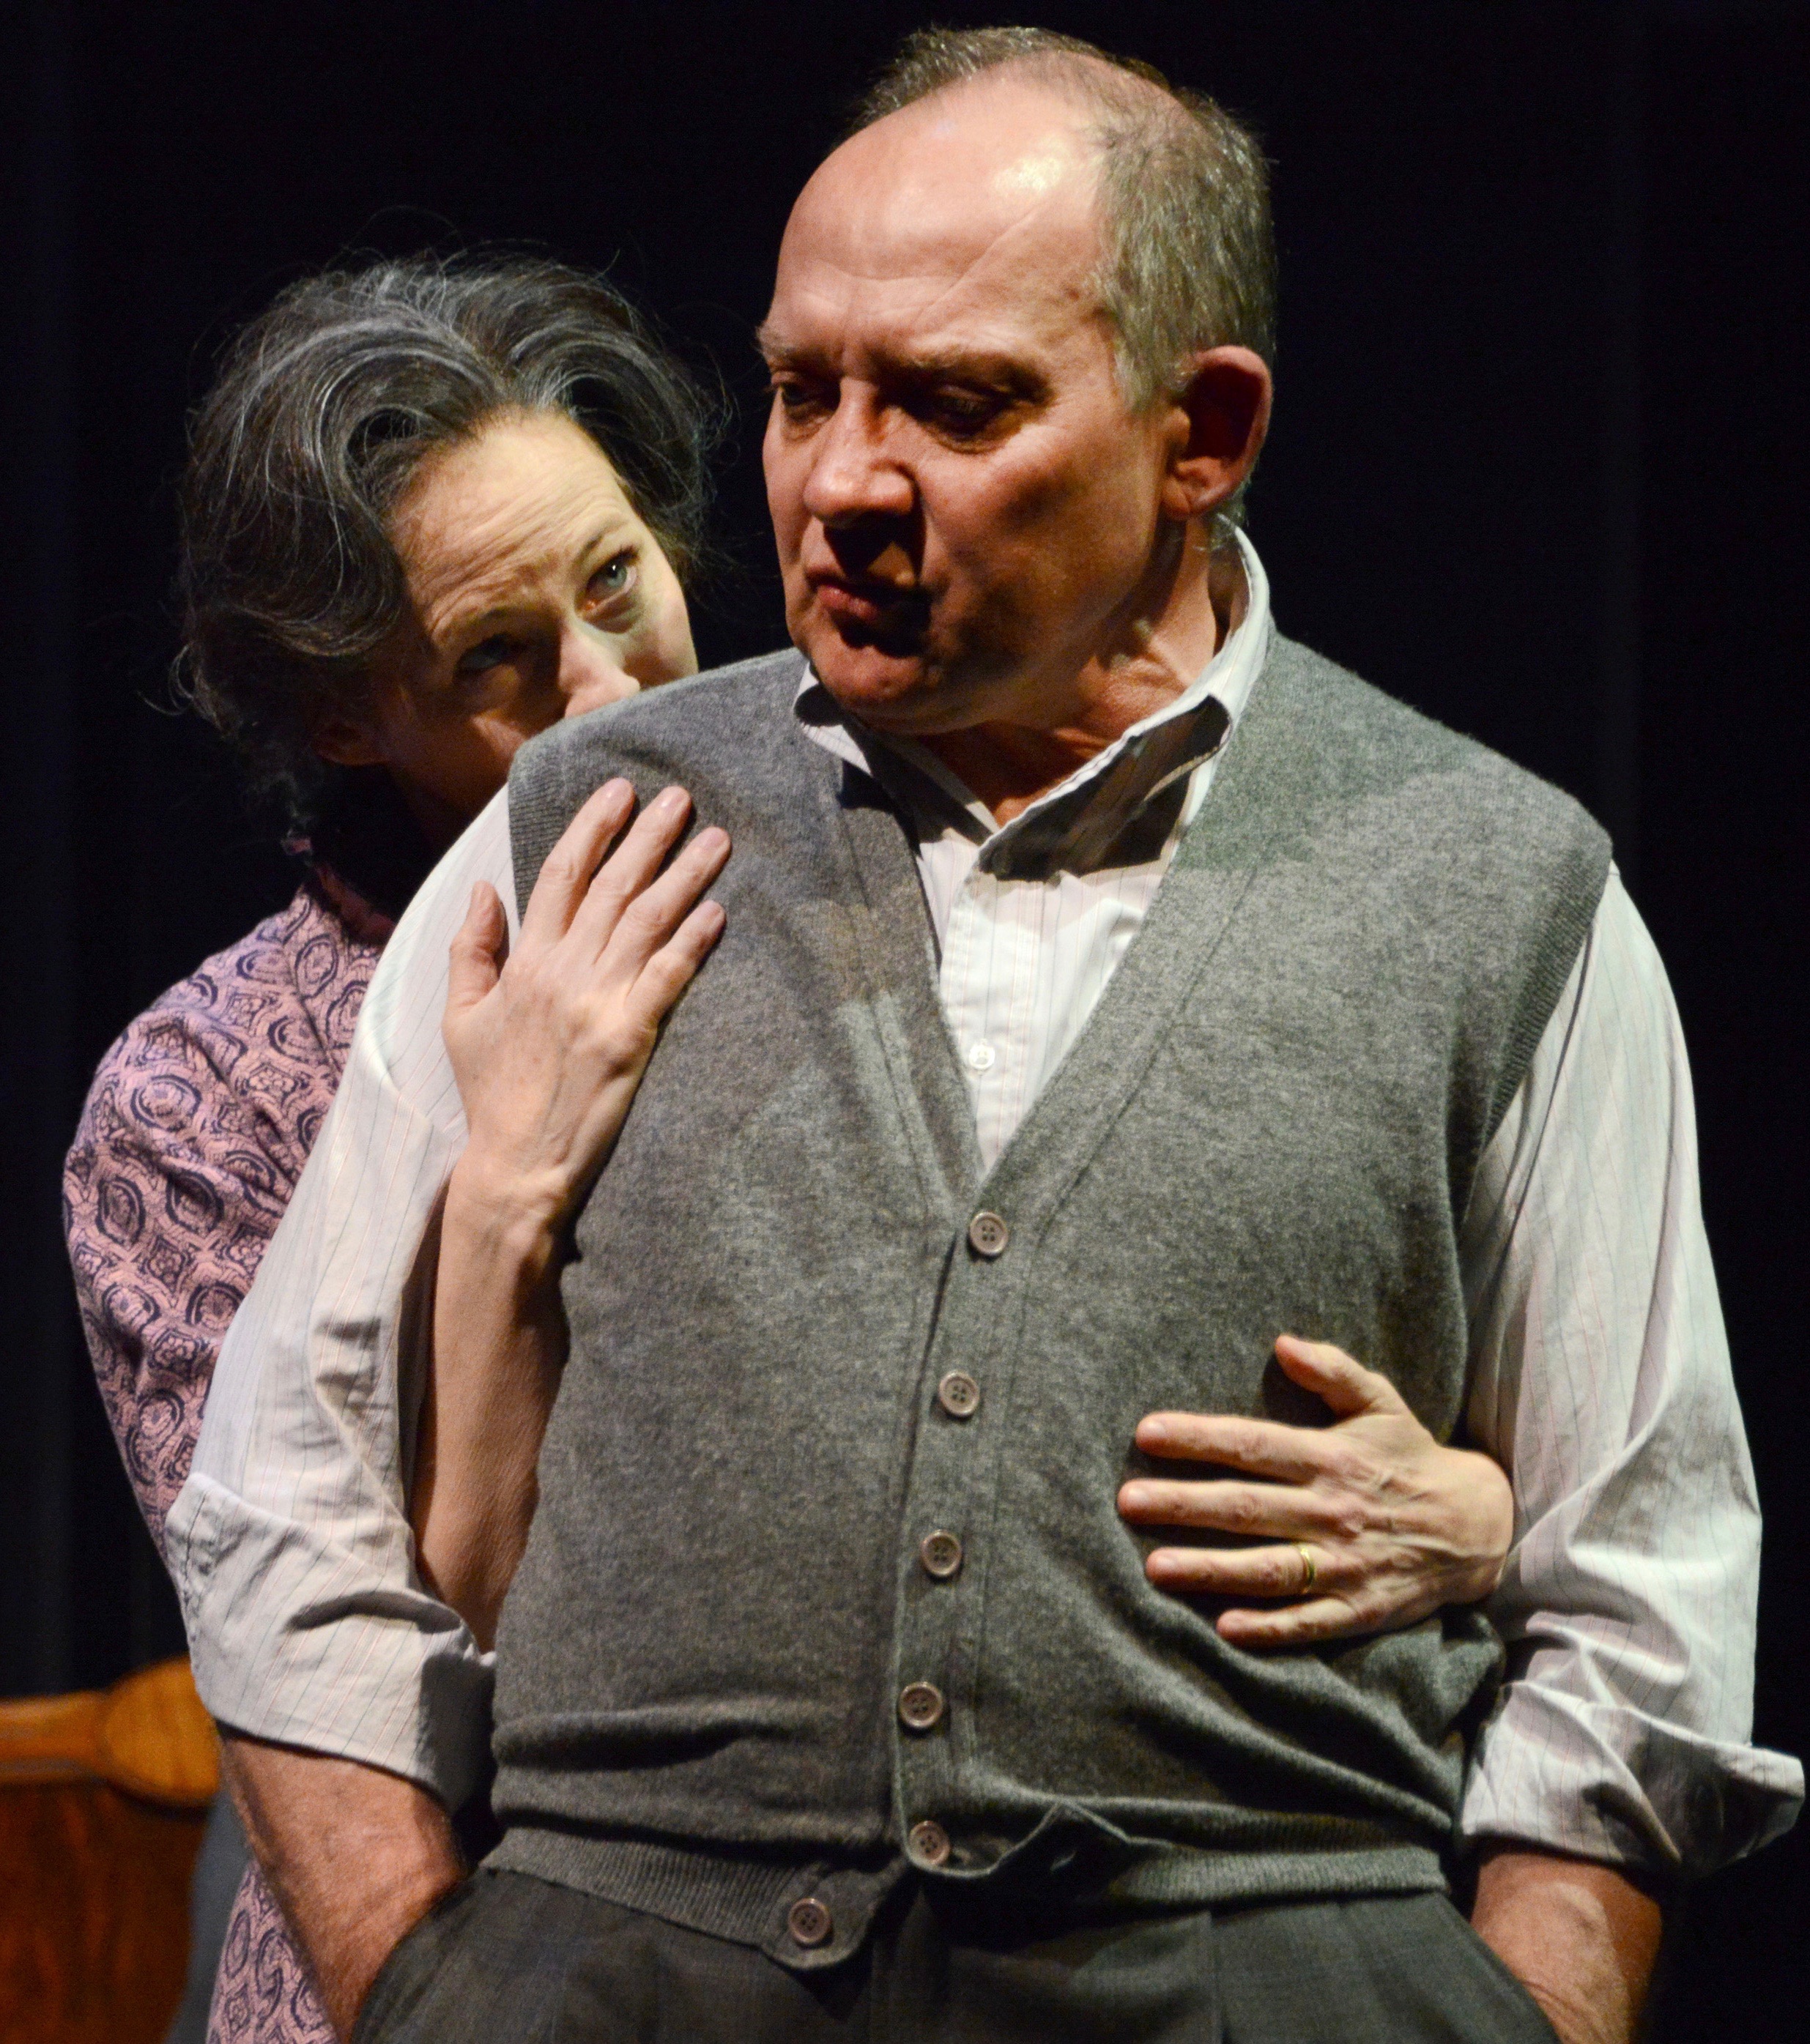 Zach Grenier is Willy Loman and Kathleen McNenny plays his wife Linda in "Death of a Salesman."